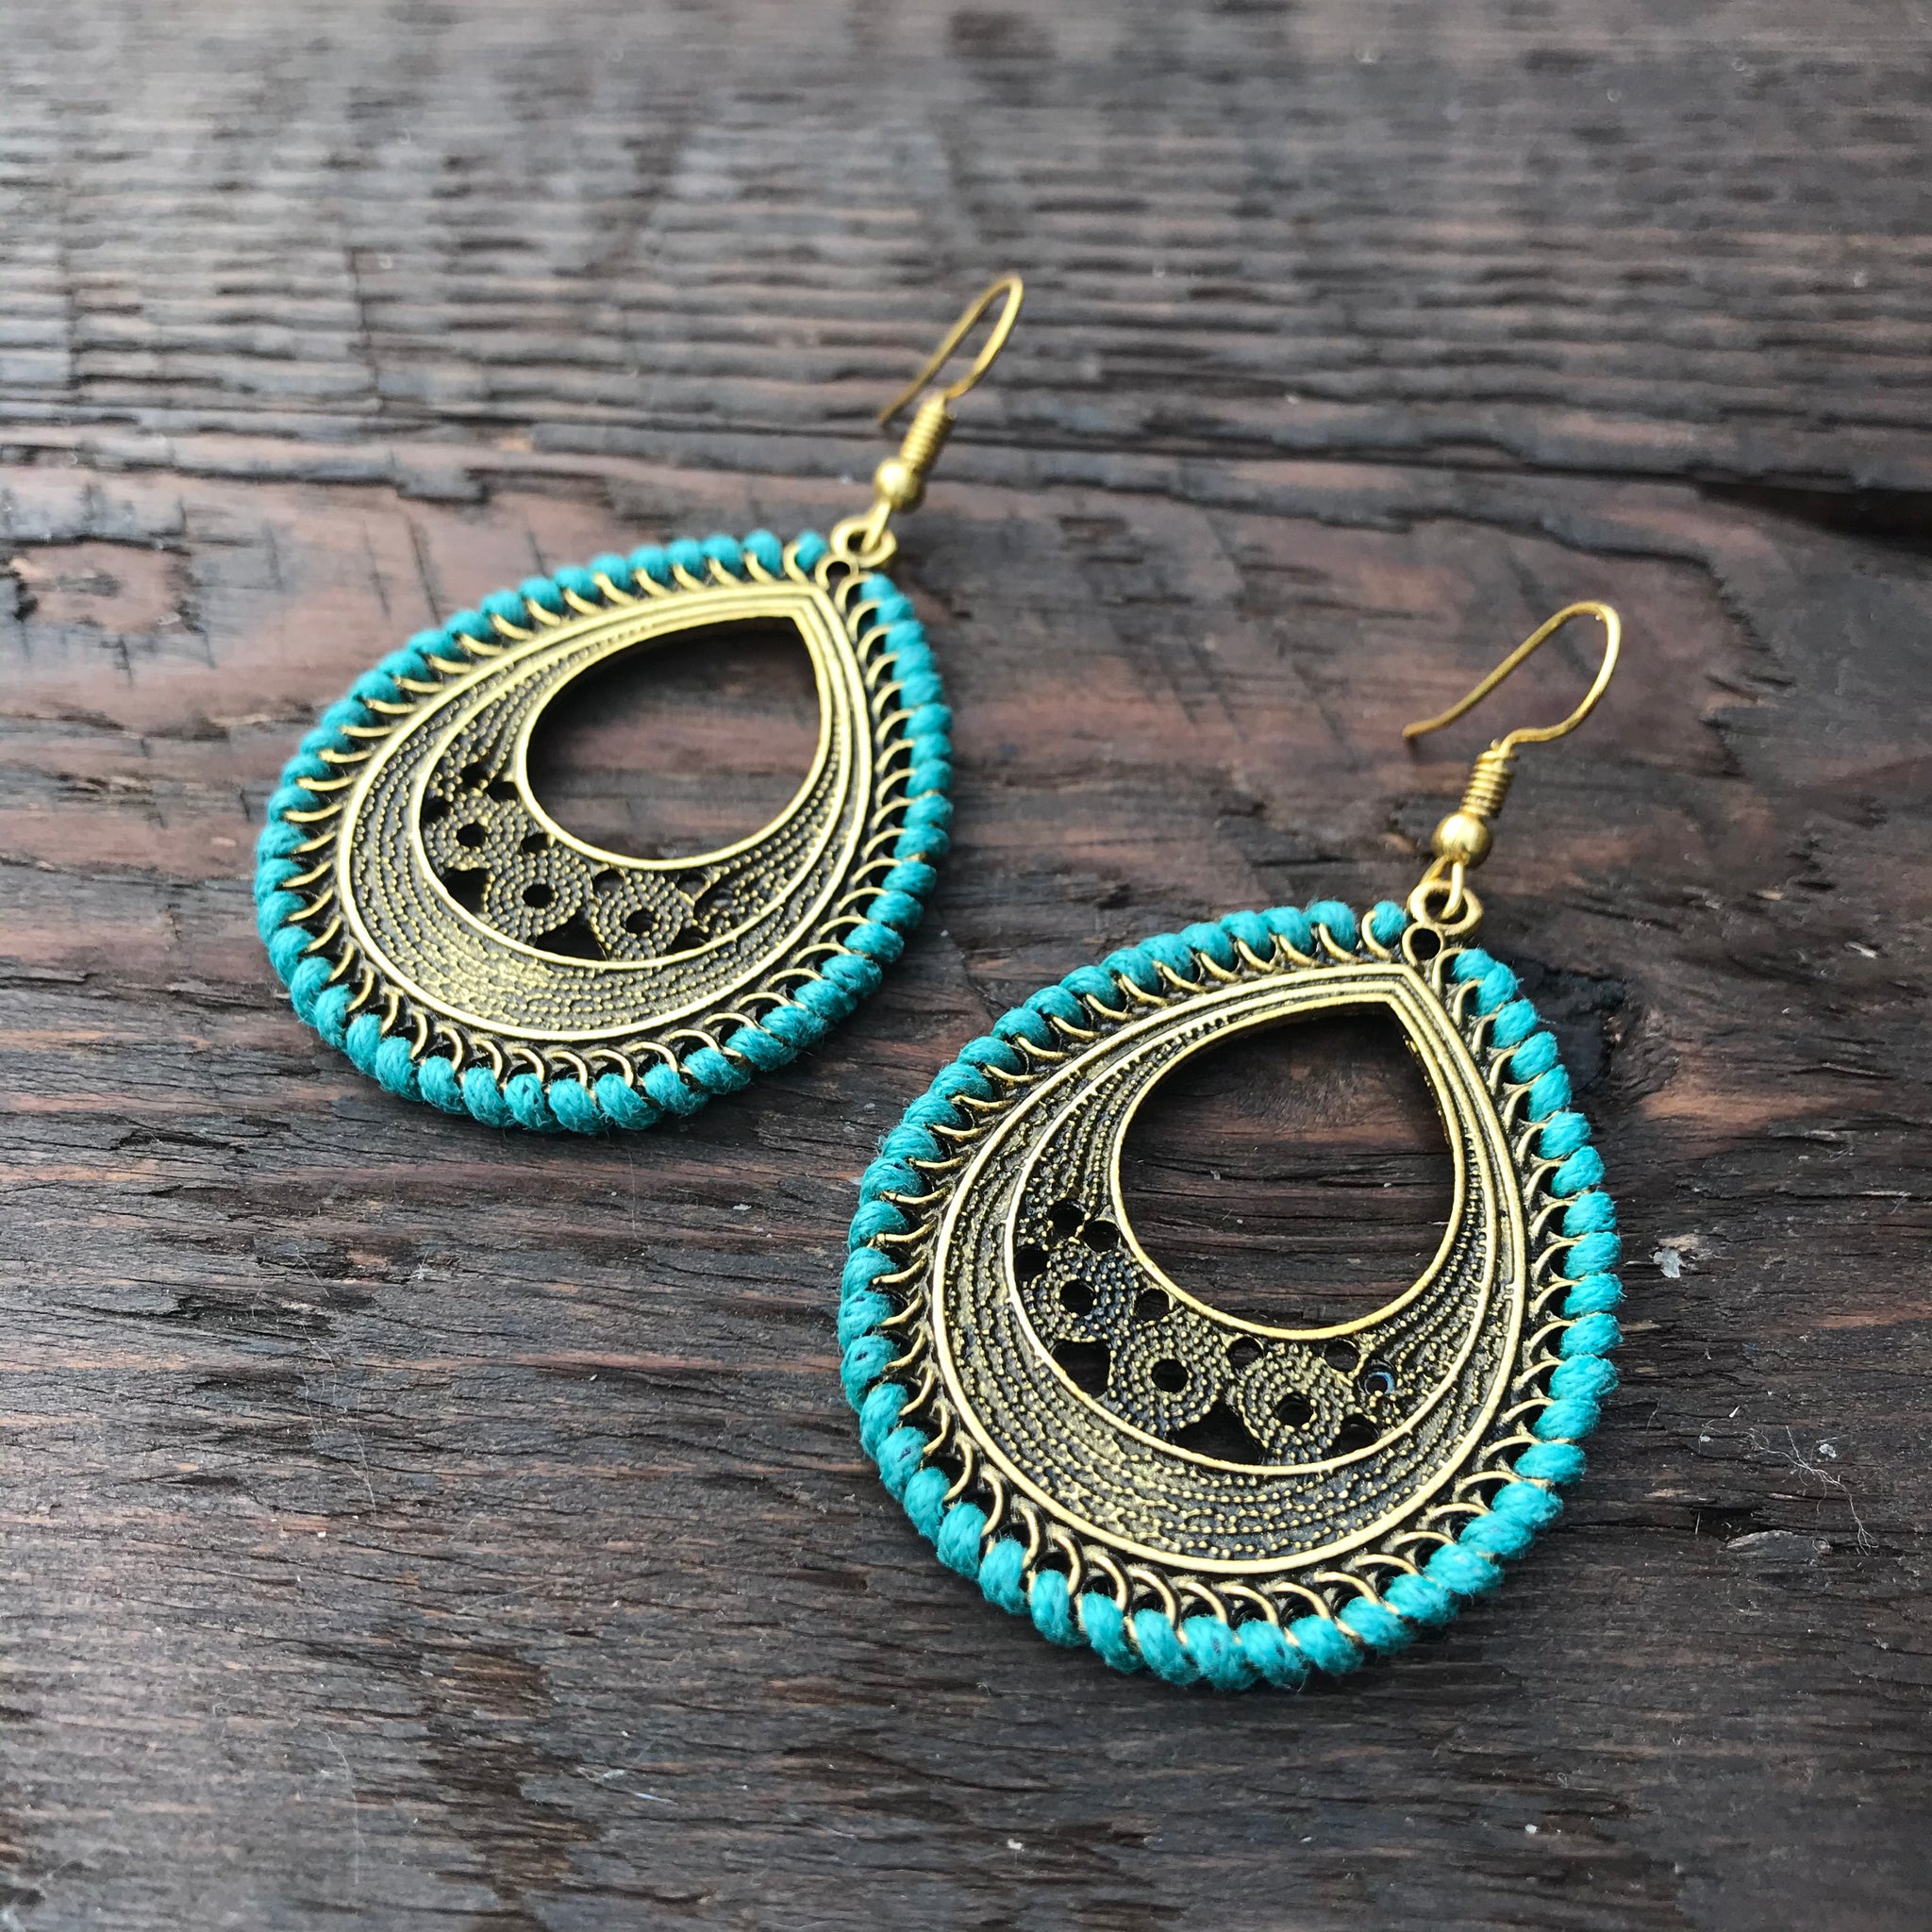 'Ethnic Vibes' Pear Shaped Design Statement Earrings